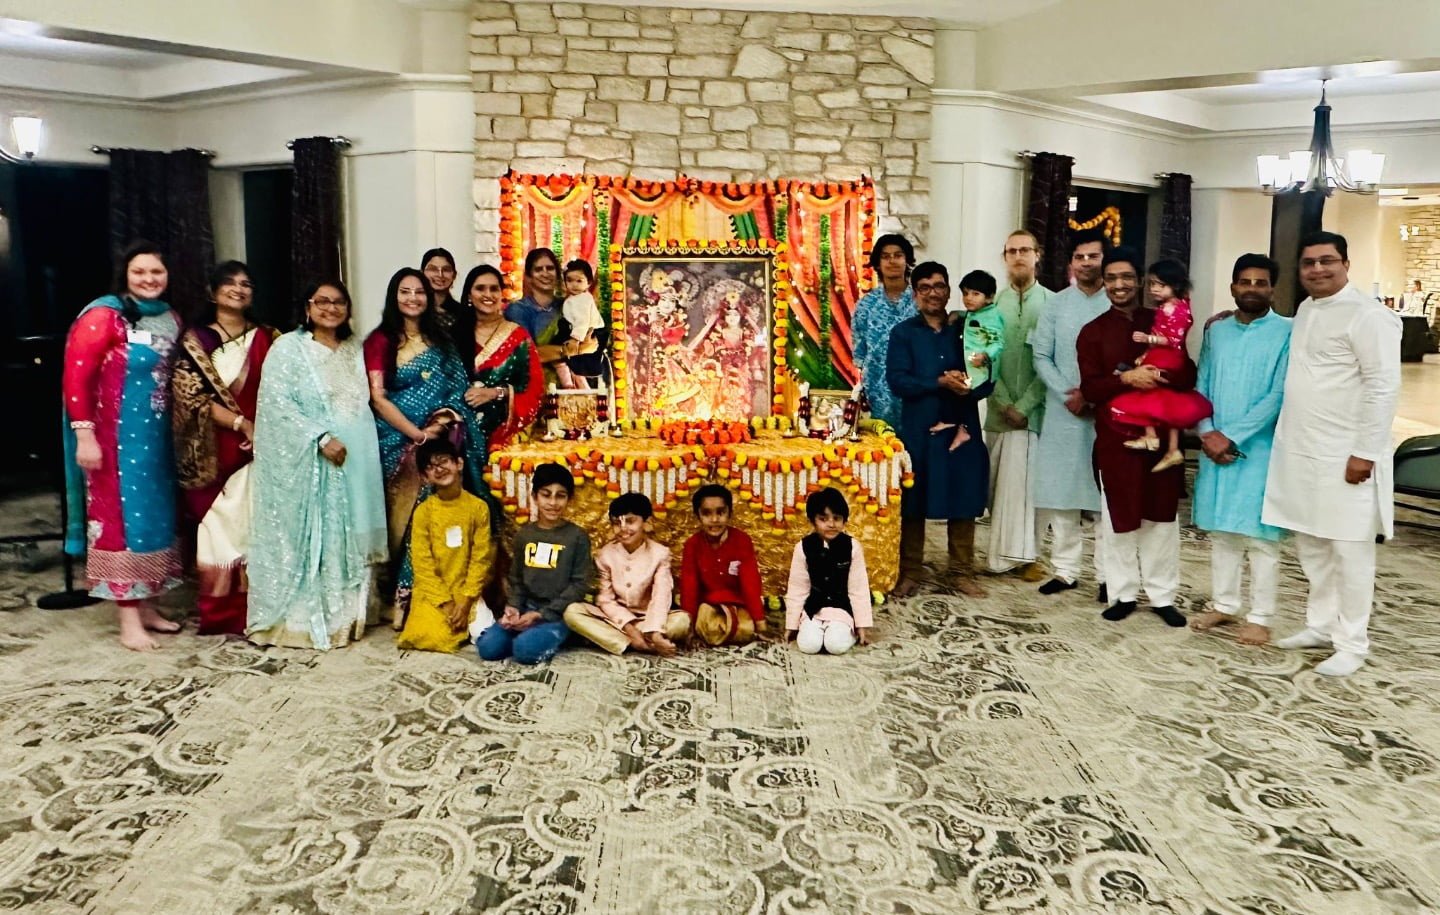 Diwali Celebrations Create Meaningful Connections and Spark Creative Service